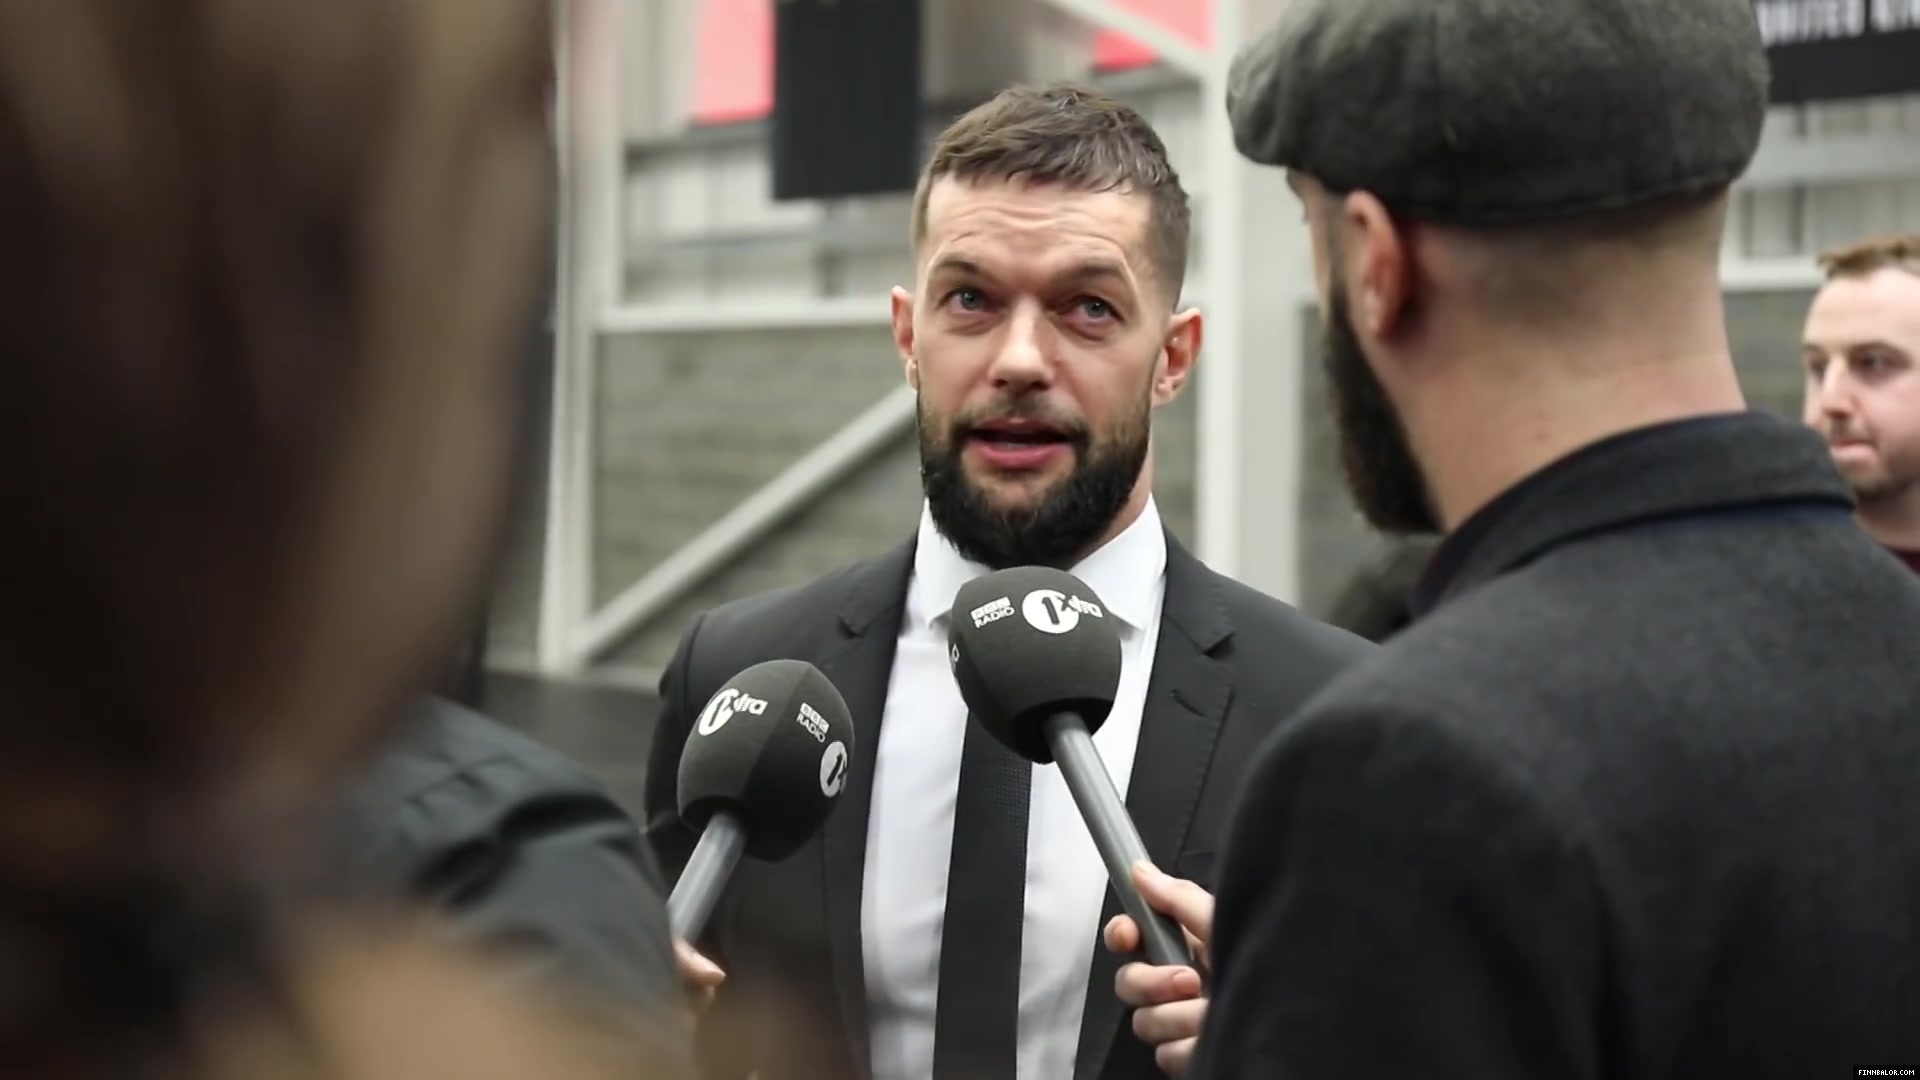 WWE_Superstar_FINN_BALOR_joins_MOUSTACHE_MOUNTAIN_at_the_opening_of_the_NXT_UK_PC_019.jpg